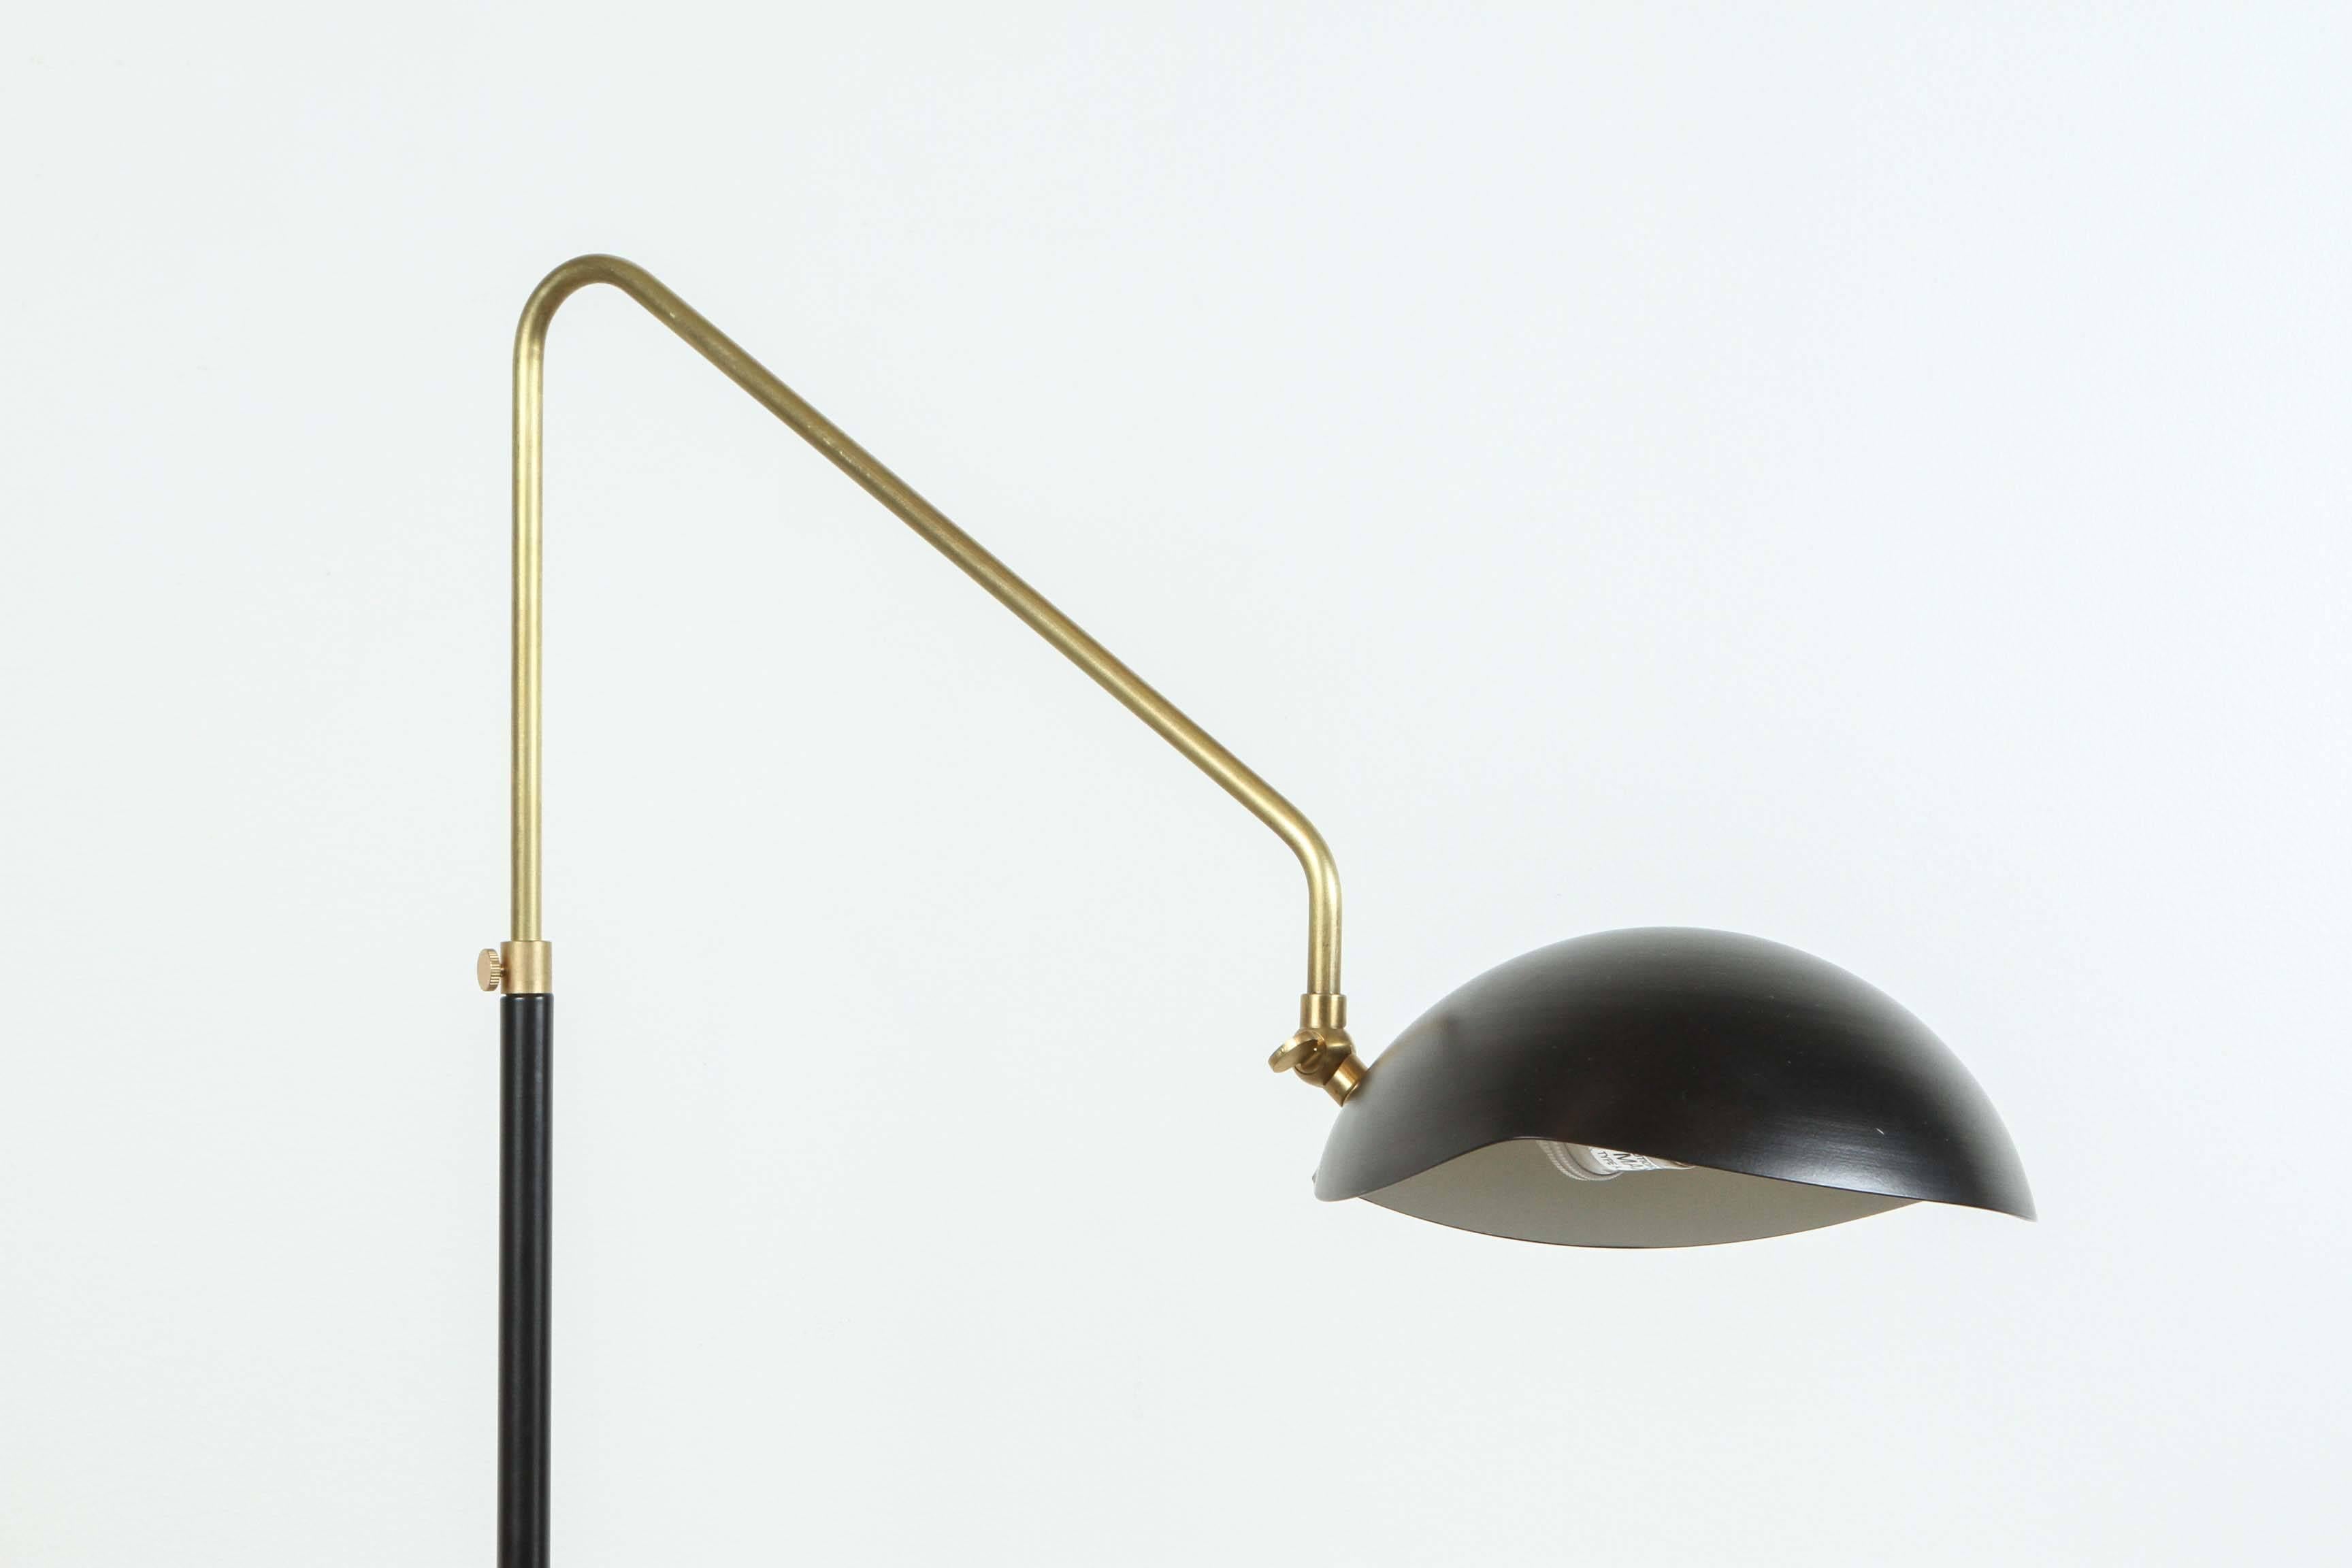 J arm floor lamp by Collected By.